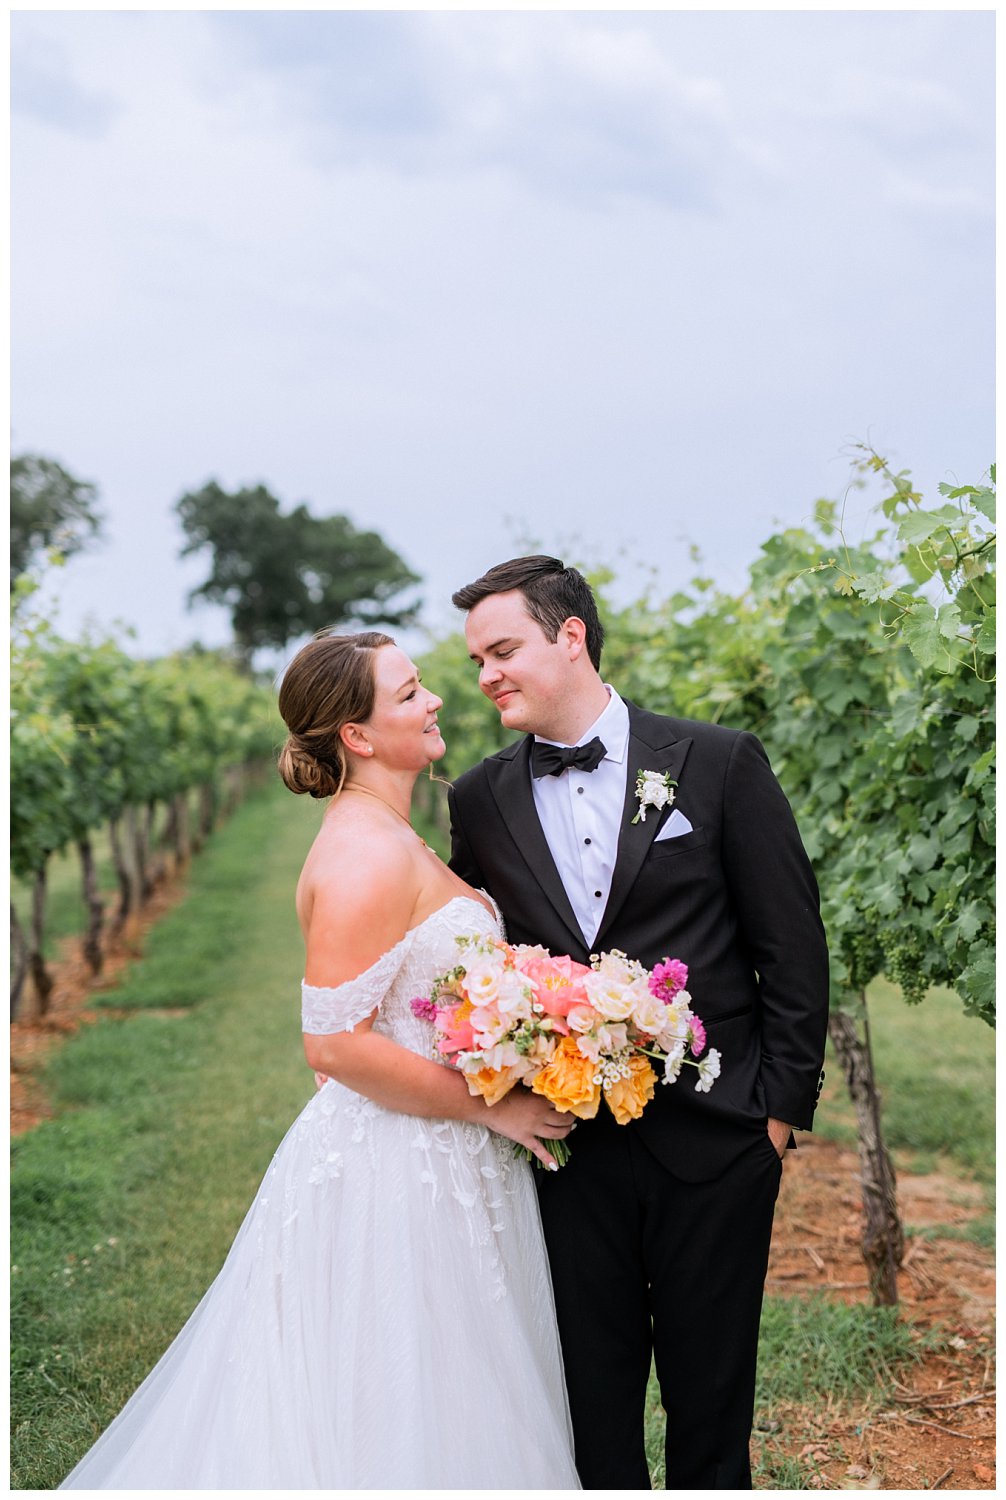 Bride and groom portraits at their colorful summer wedding